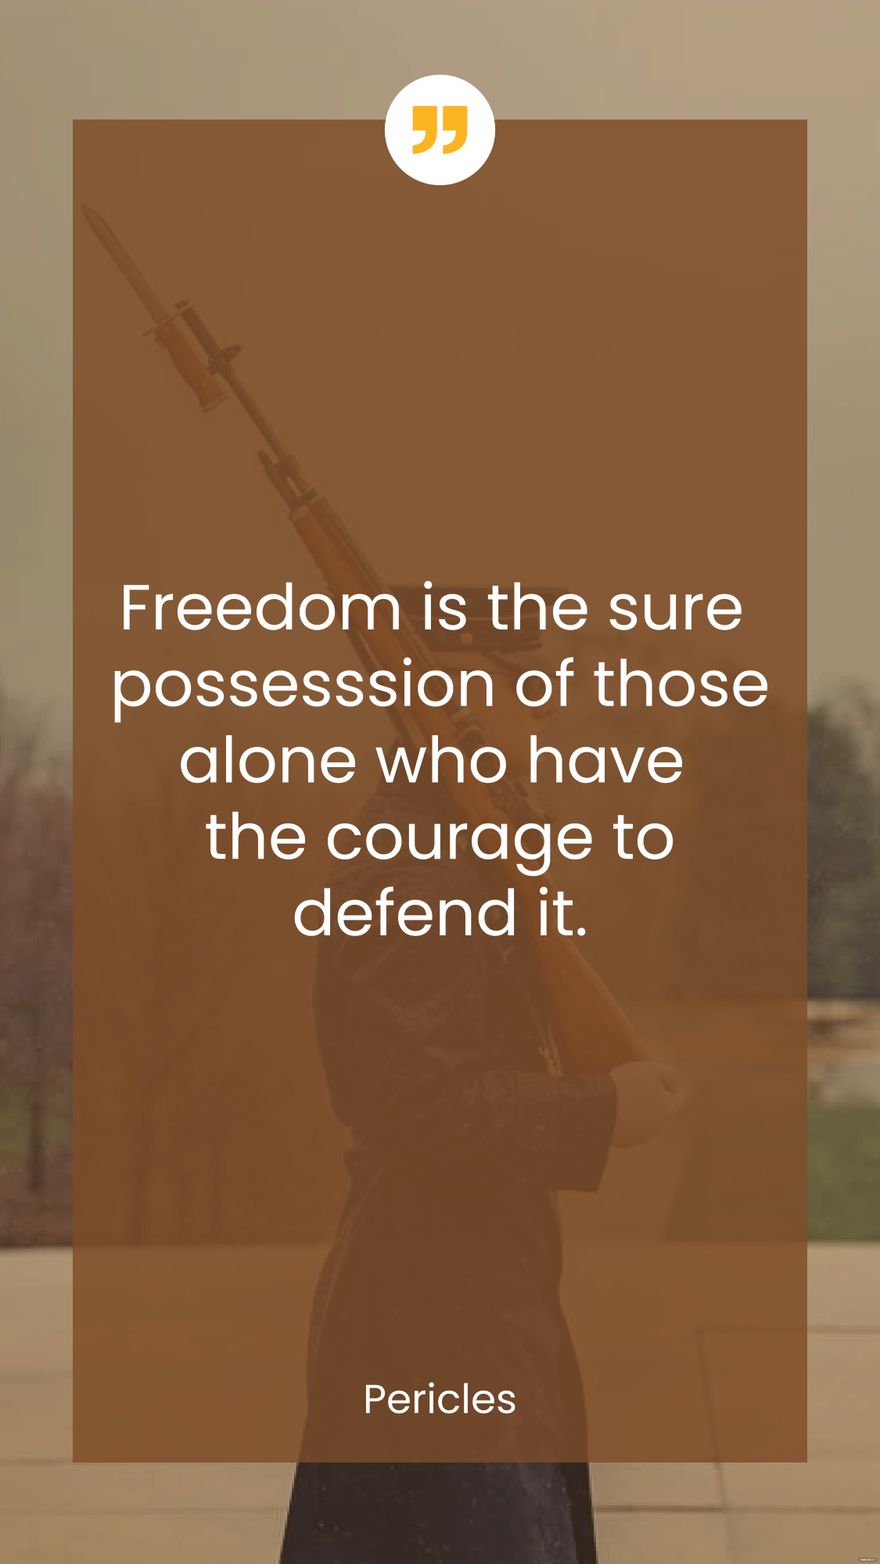 Free Pericles - Freedom is the sure possession of those alone who have the courage to defend it. in JPG